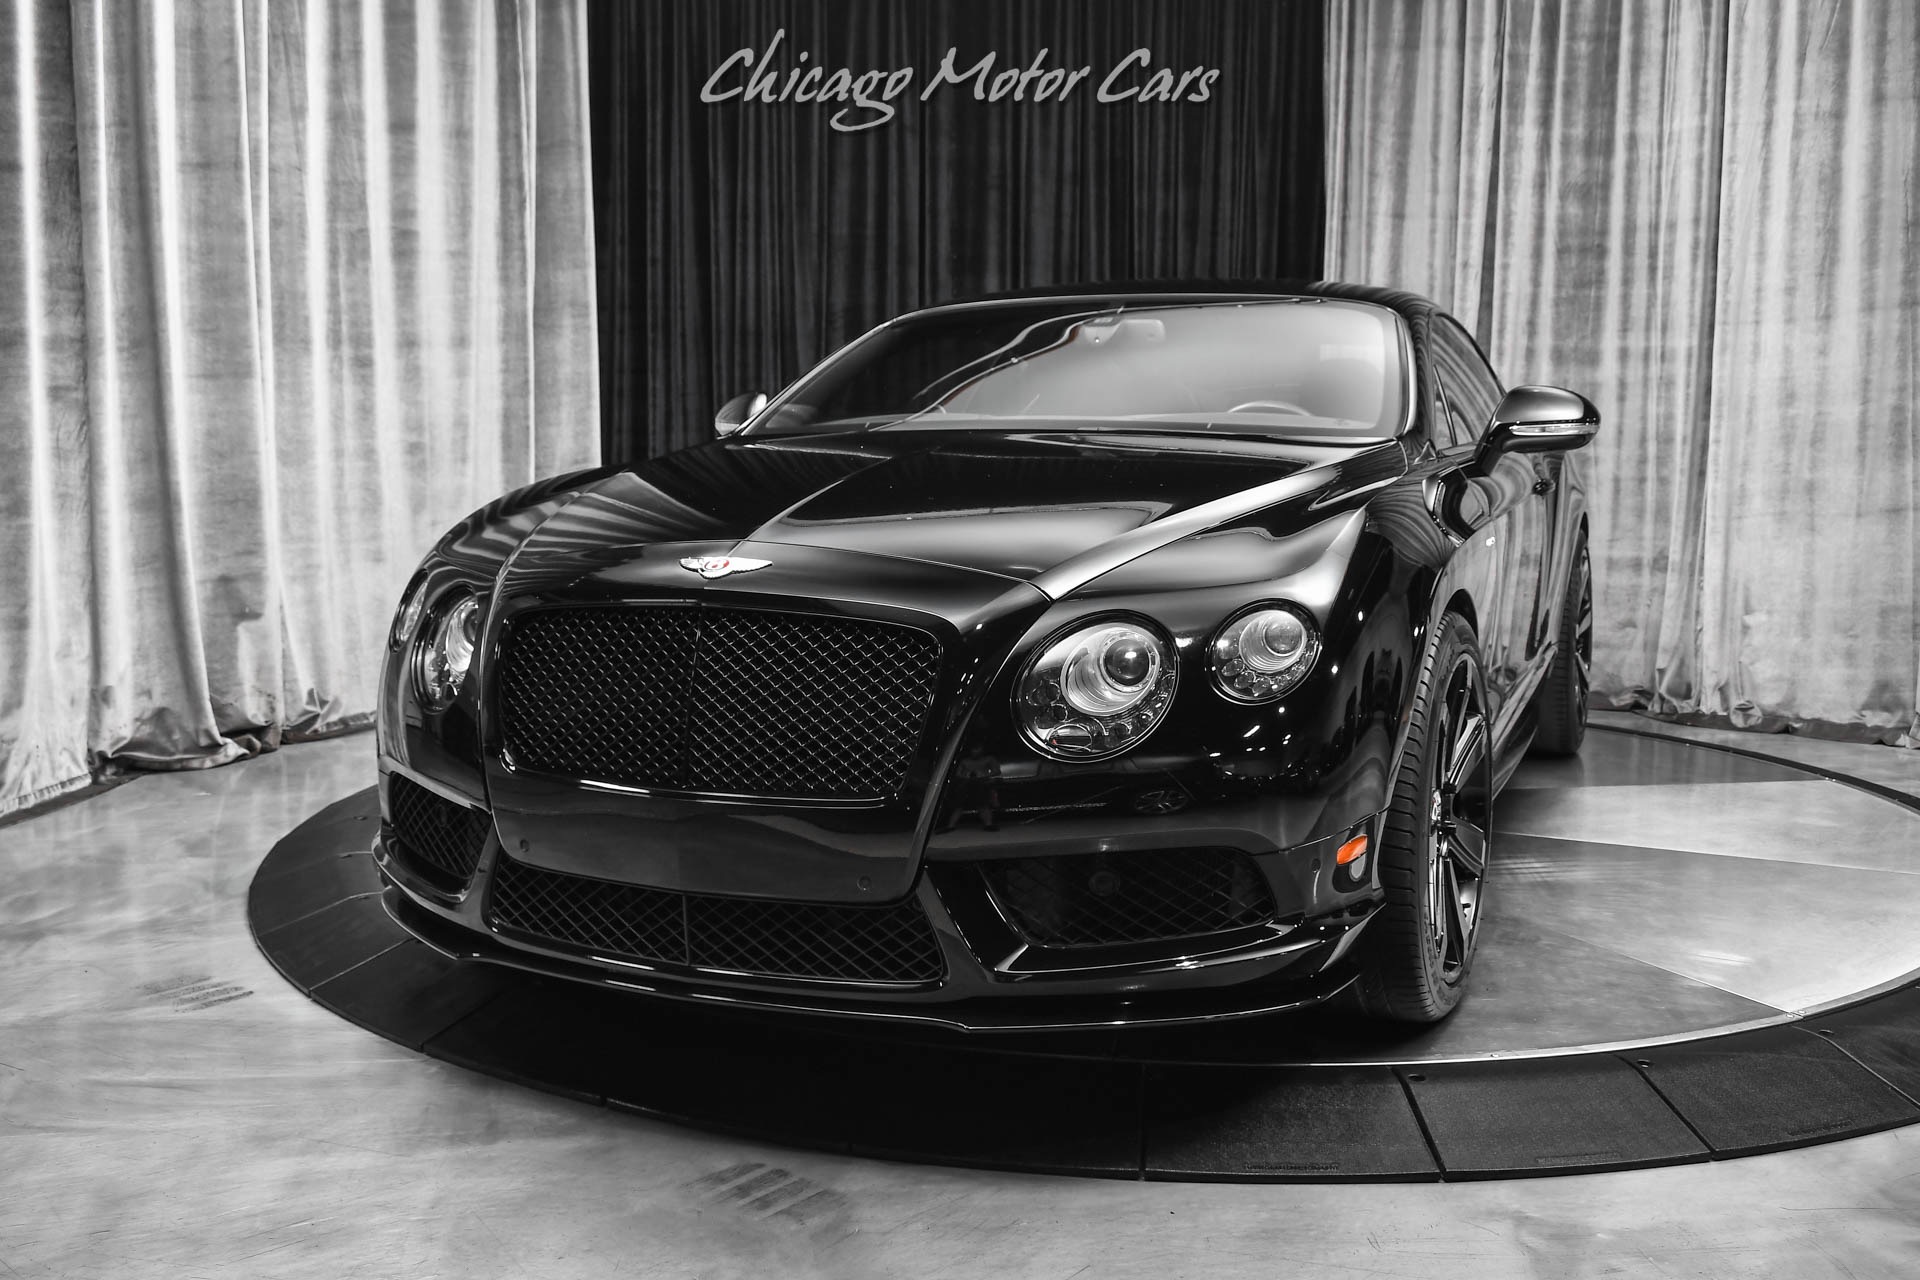 Used 2015 Bentley Continental GT V8 S Mulliner Concours Series Very RARE!  FULL Front PPF! LOADED! For Sale (Special Pricing) | Chicago Motor Cars  Stock #19574A